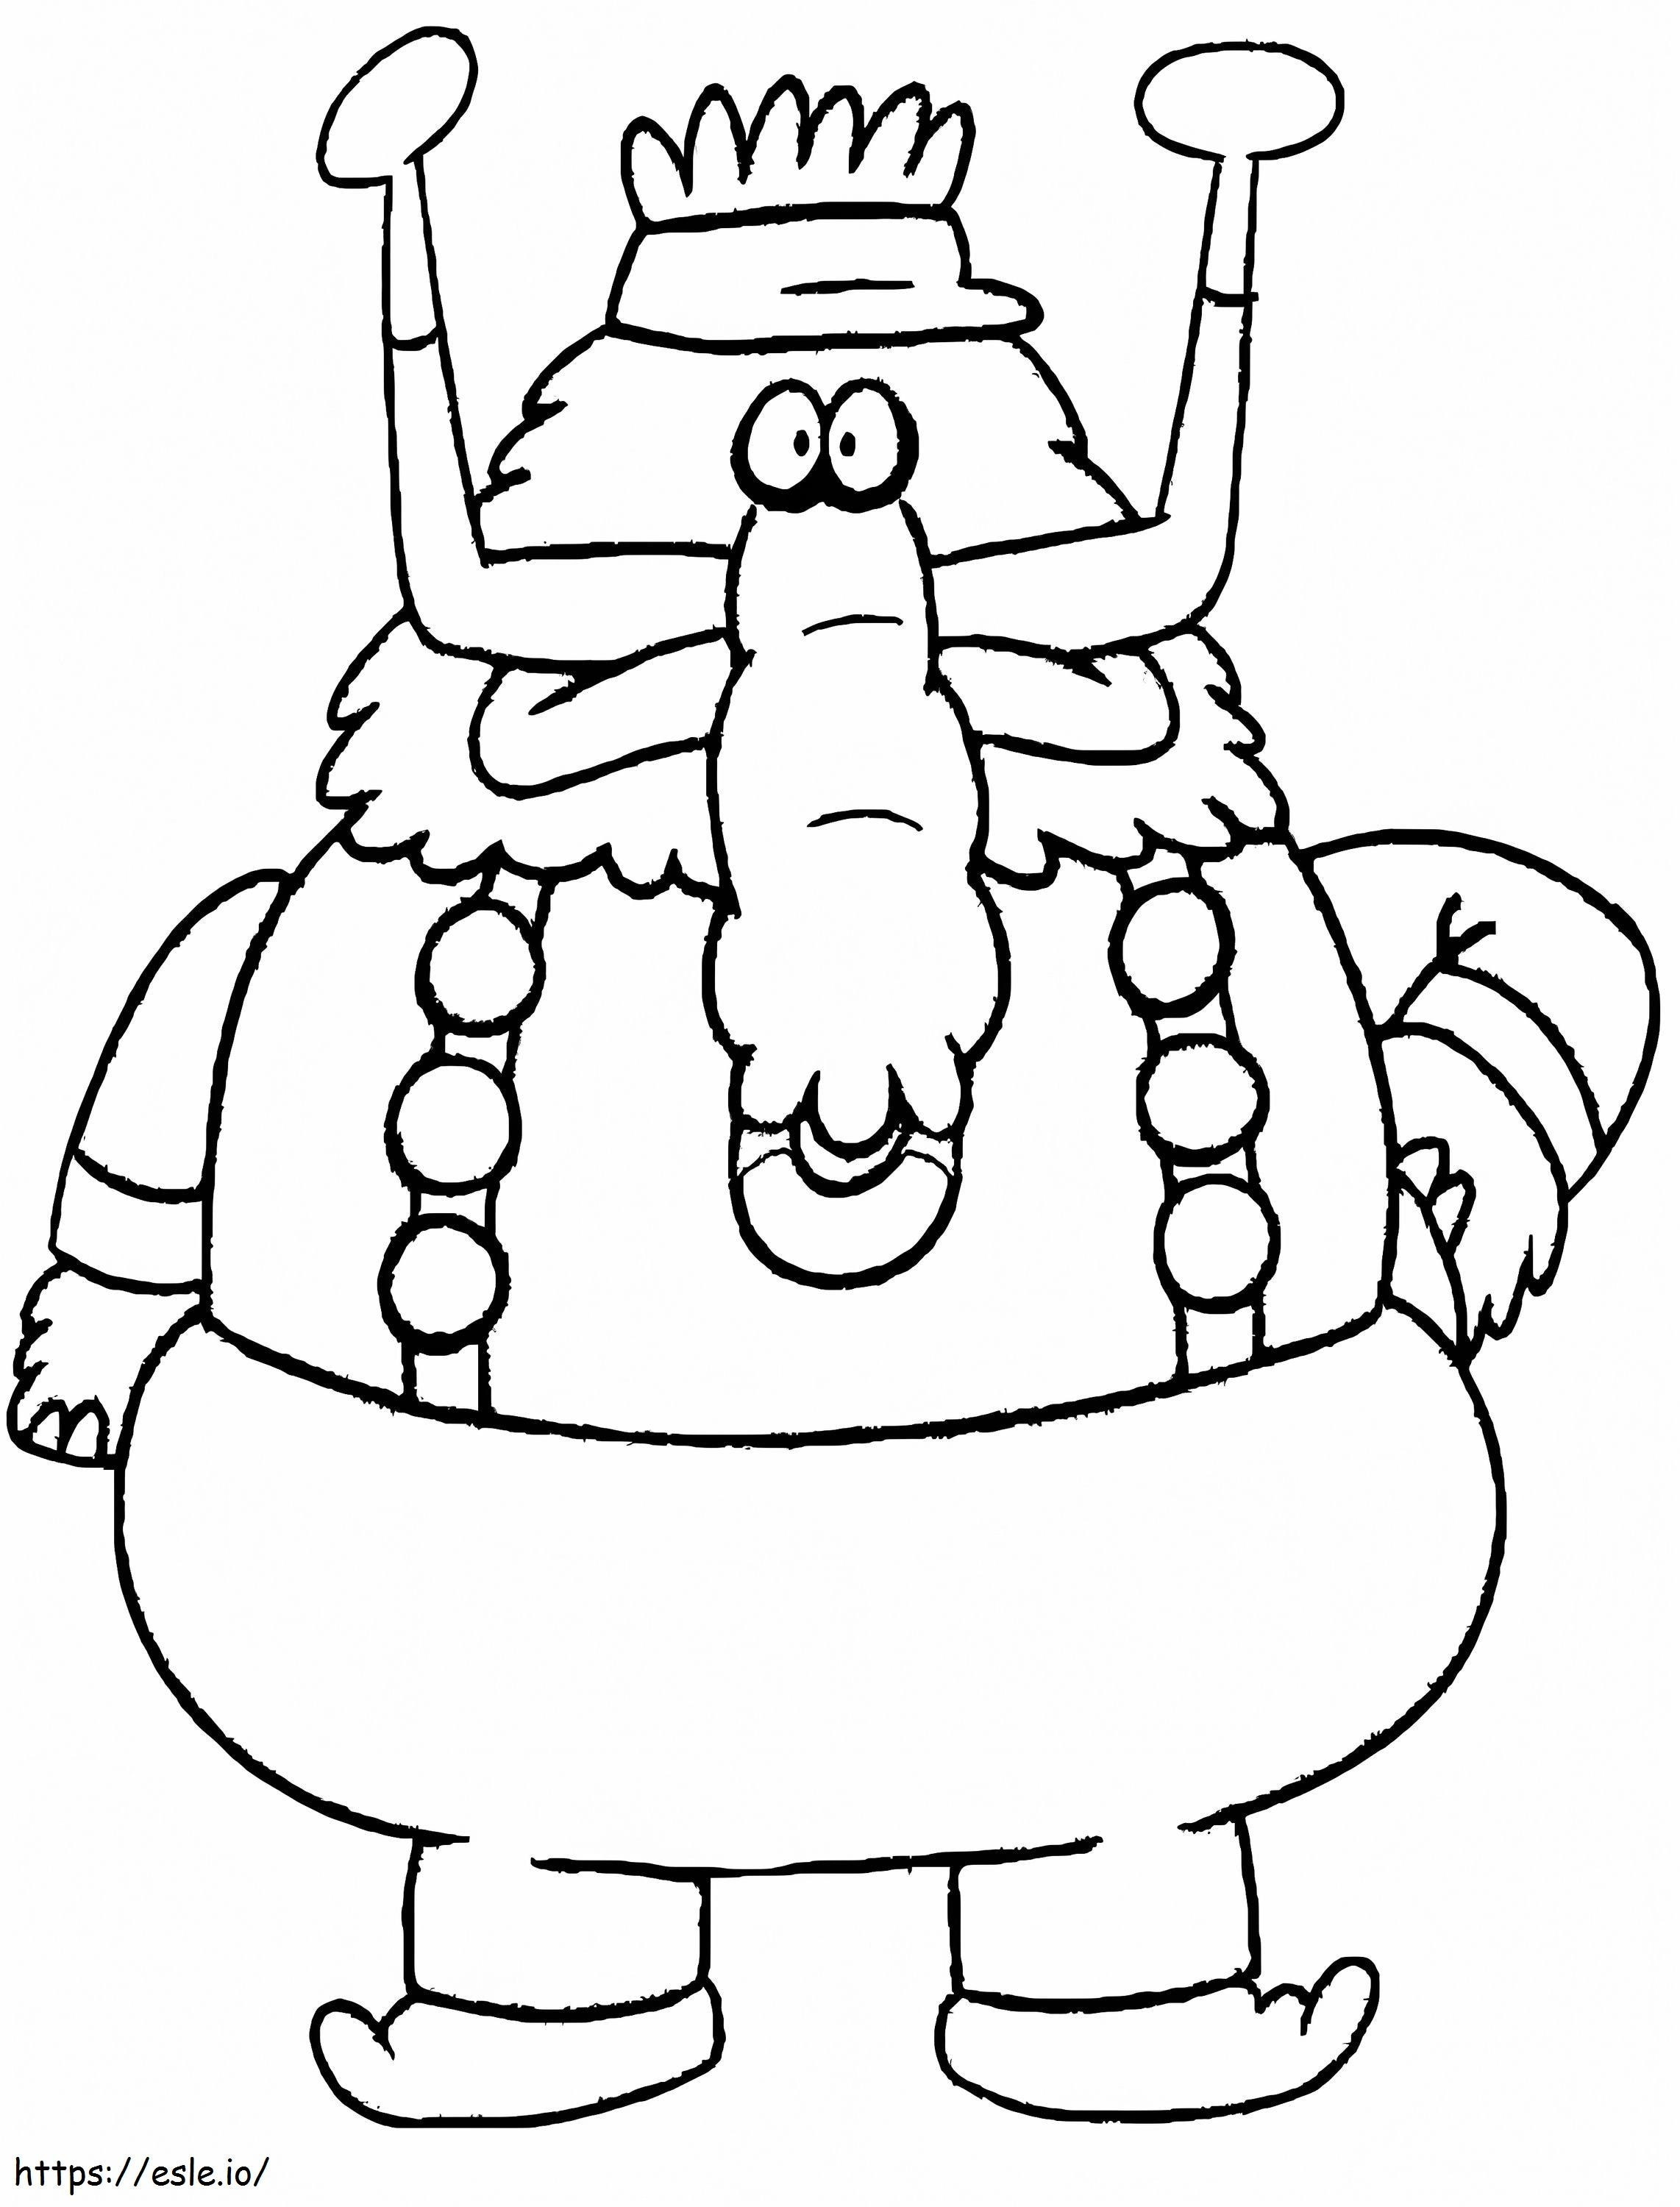 Gazpacho From Chowder coloring page